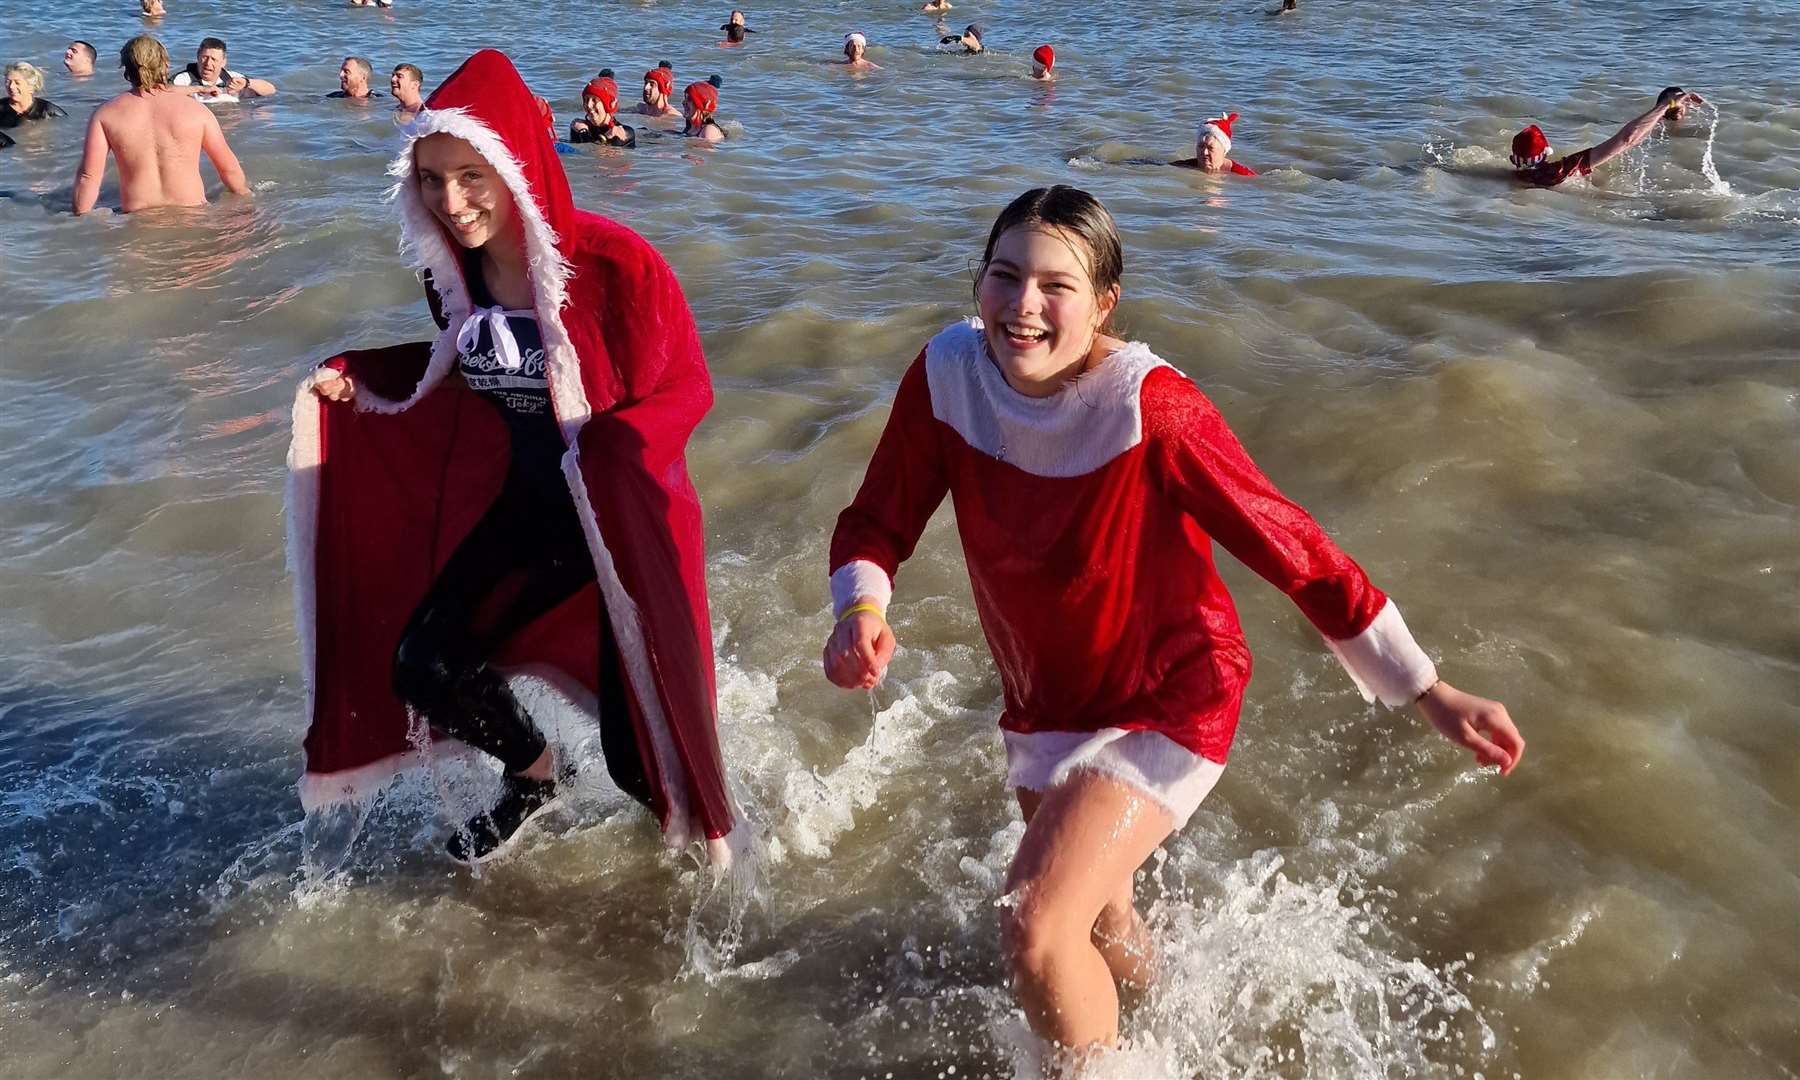 Deal’s Boxing Day Dip saw lots of swimmers dress up and head into the sea last year. Picture: The Unofficial Photographer